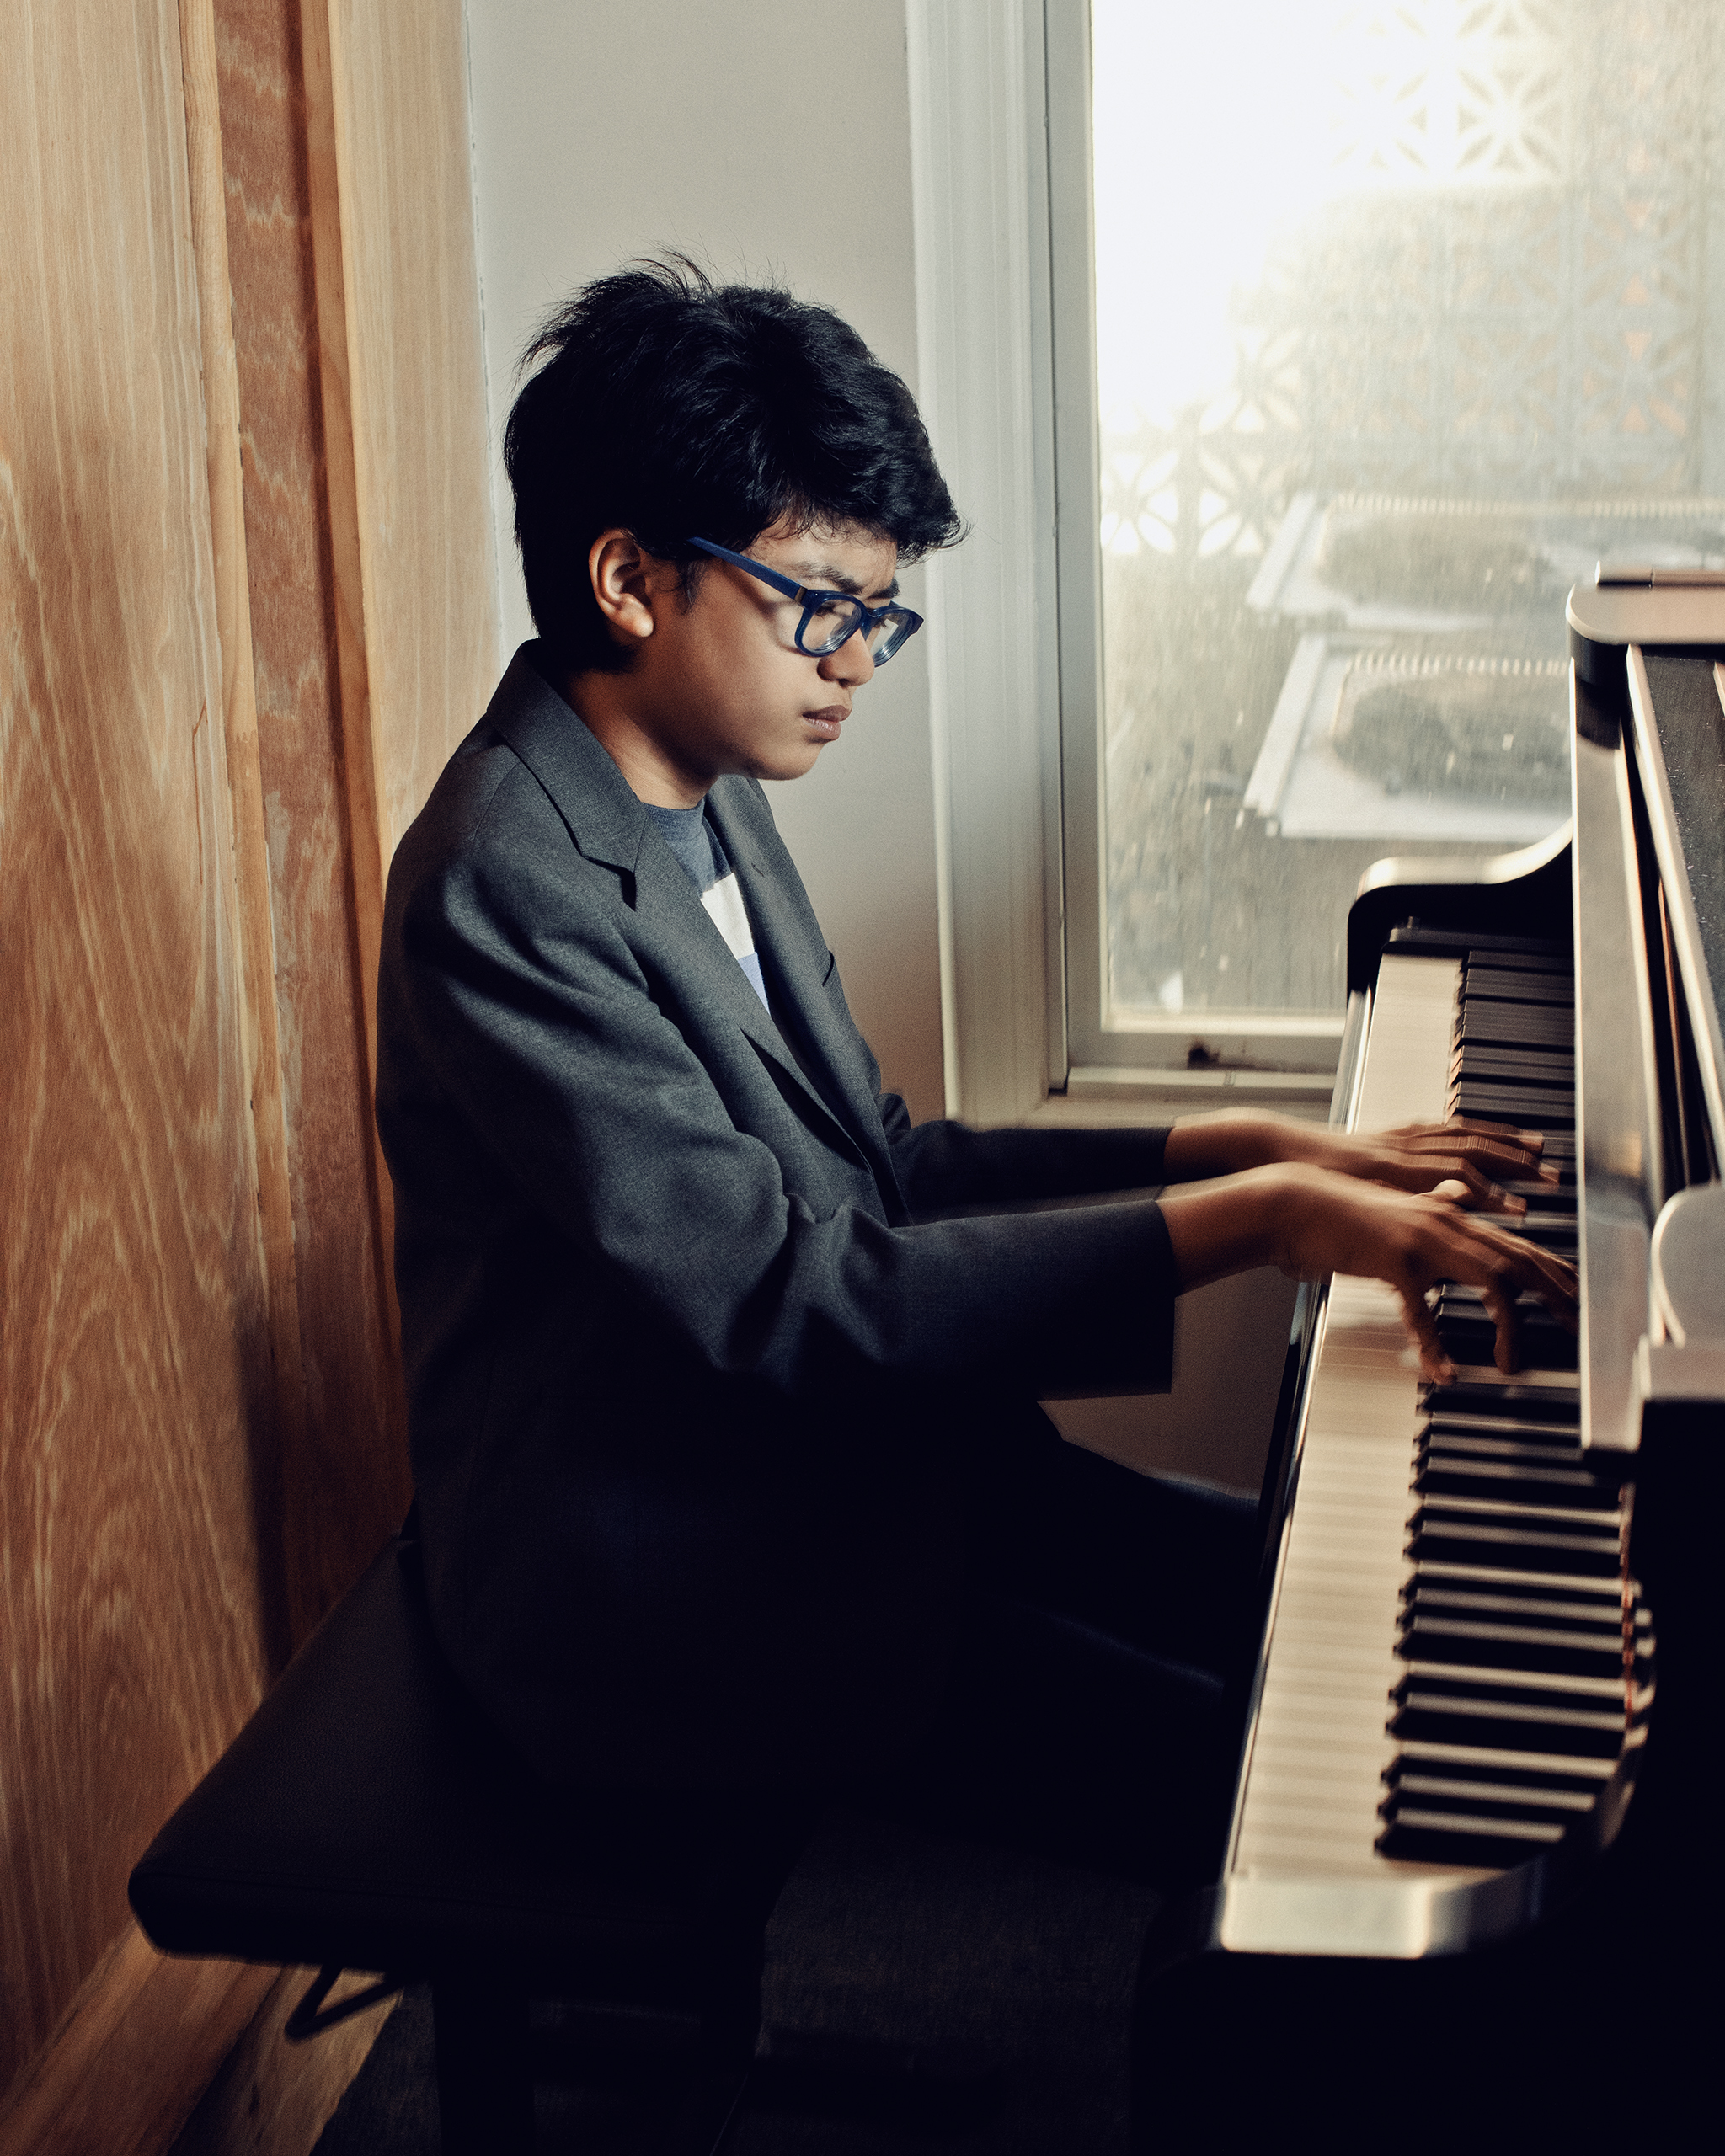 Joey Alexander at a rehearsal studio in New York, NY. Sept. 25, 2016. (Ryan Pfluger for TIME)